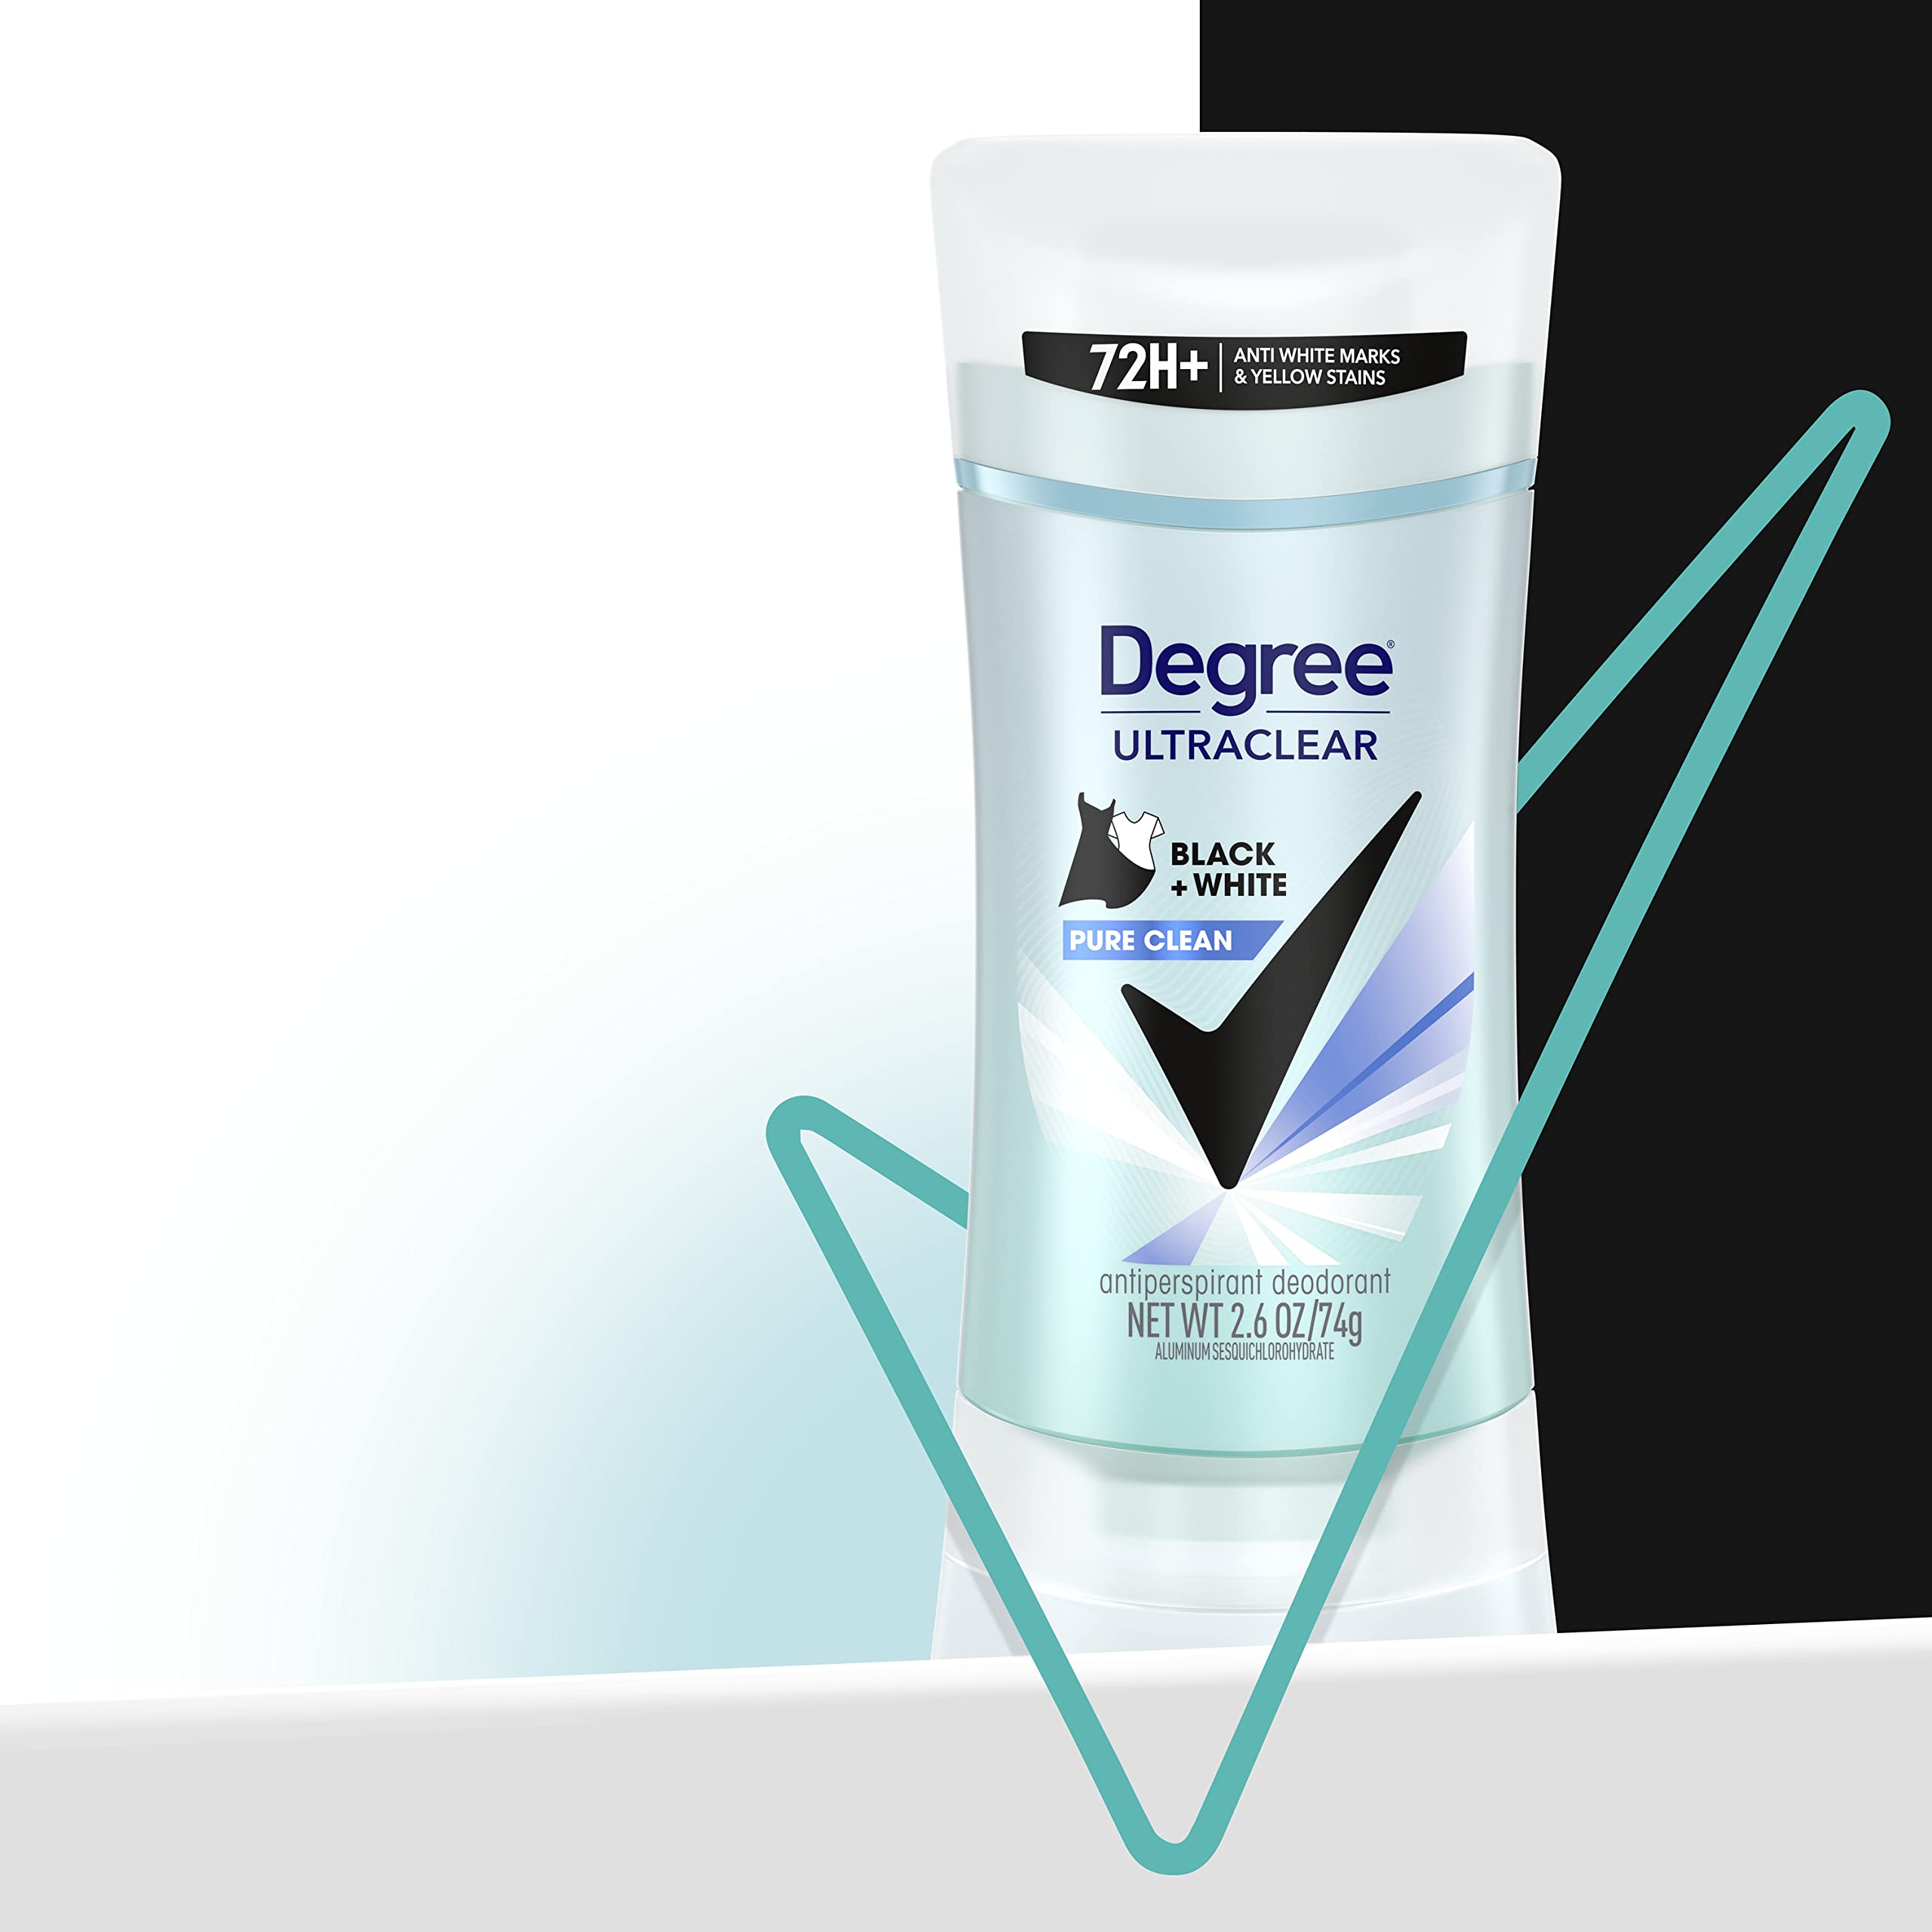 Degree Antiperspirant for Women Protects from Deodorant Stains Pure Clean Deodorant for Women 2.6 oz, Pack of 4